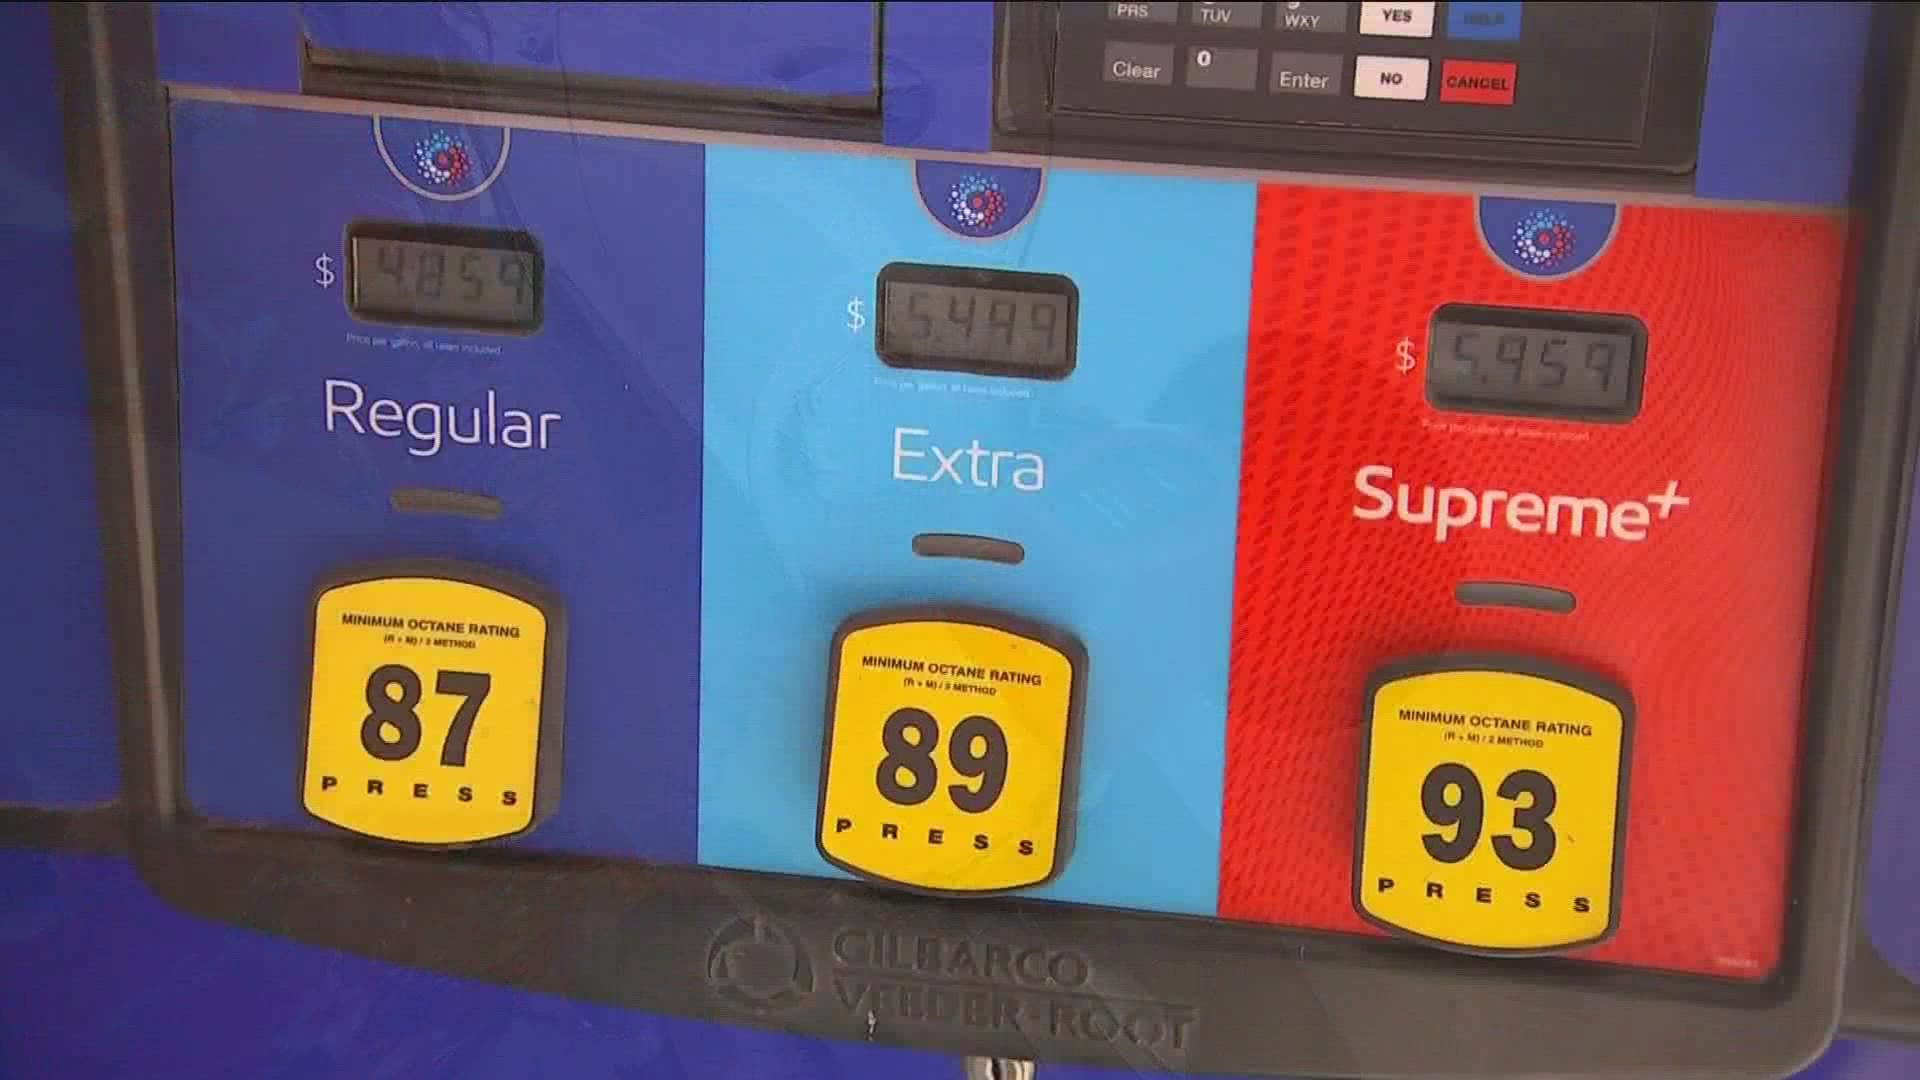 A year ago, the average price was $3.20 per gallon, a price point many drivers are eager to get back to.